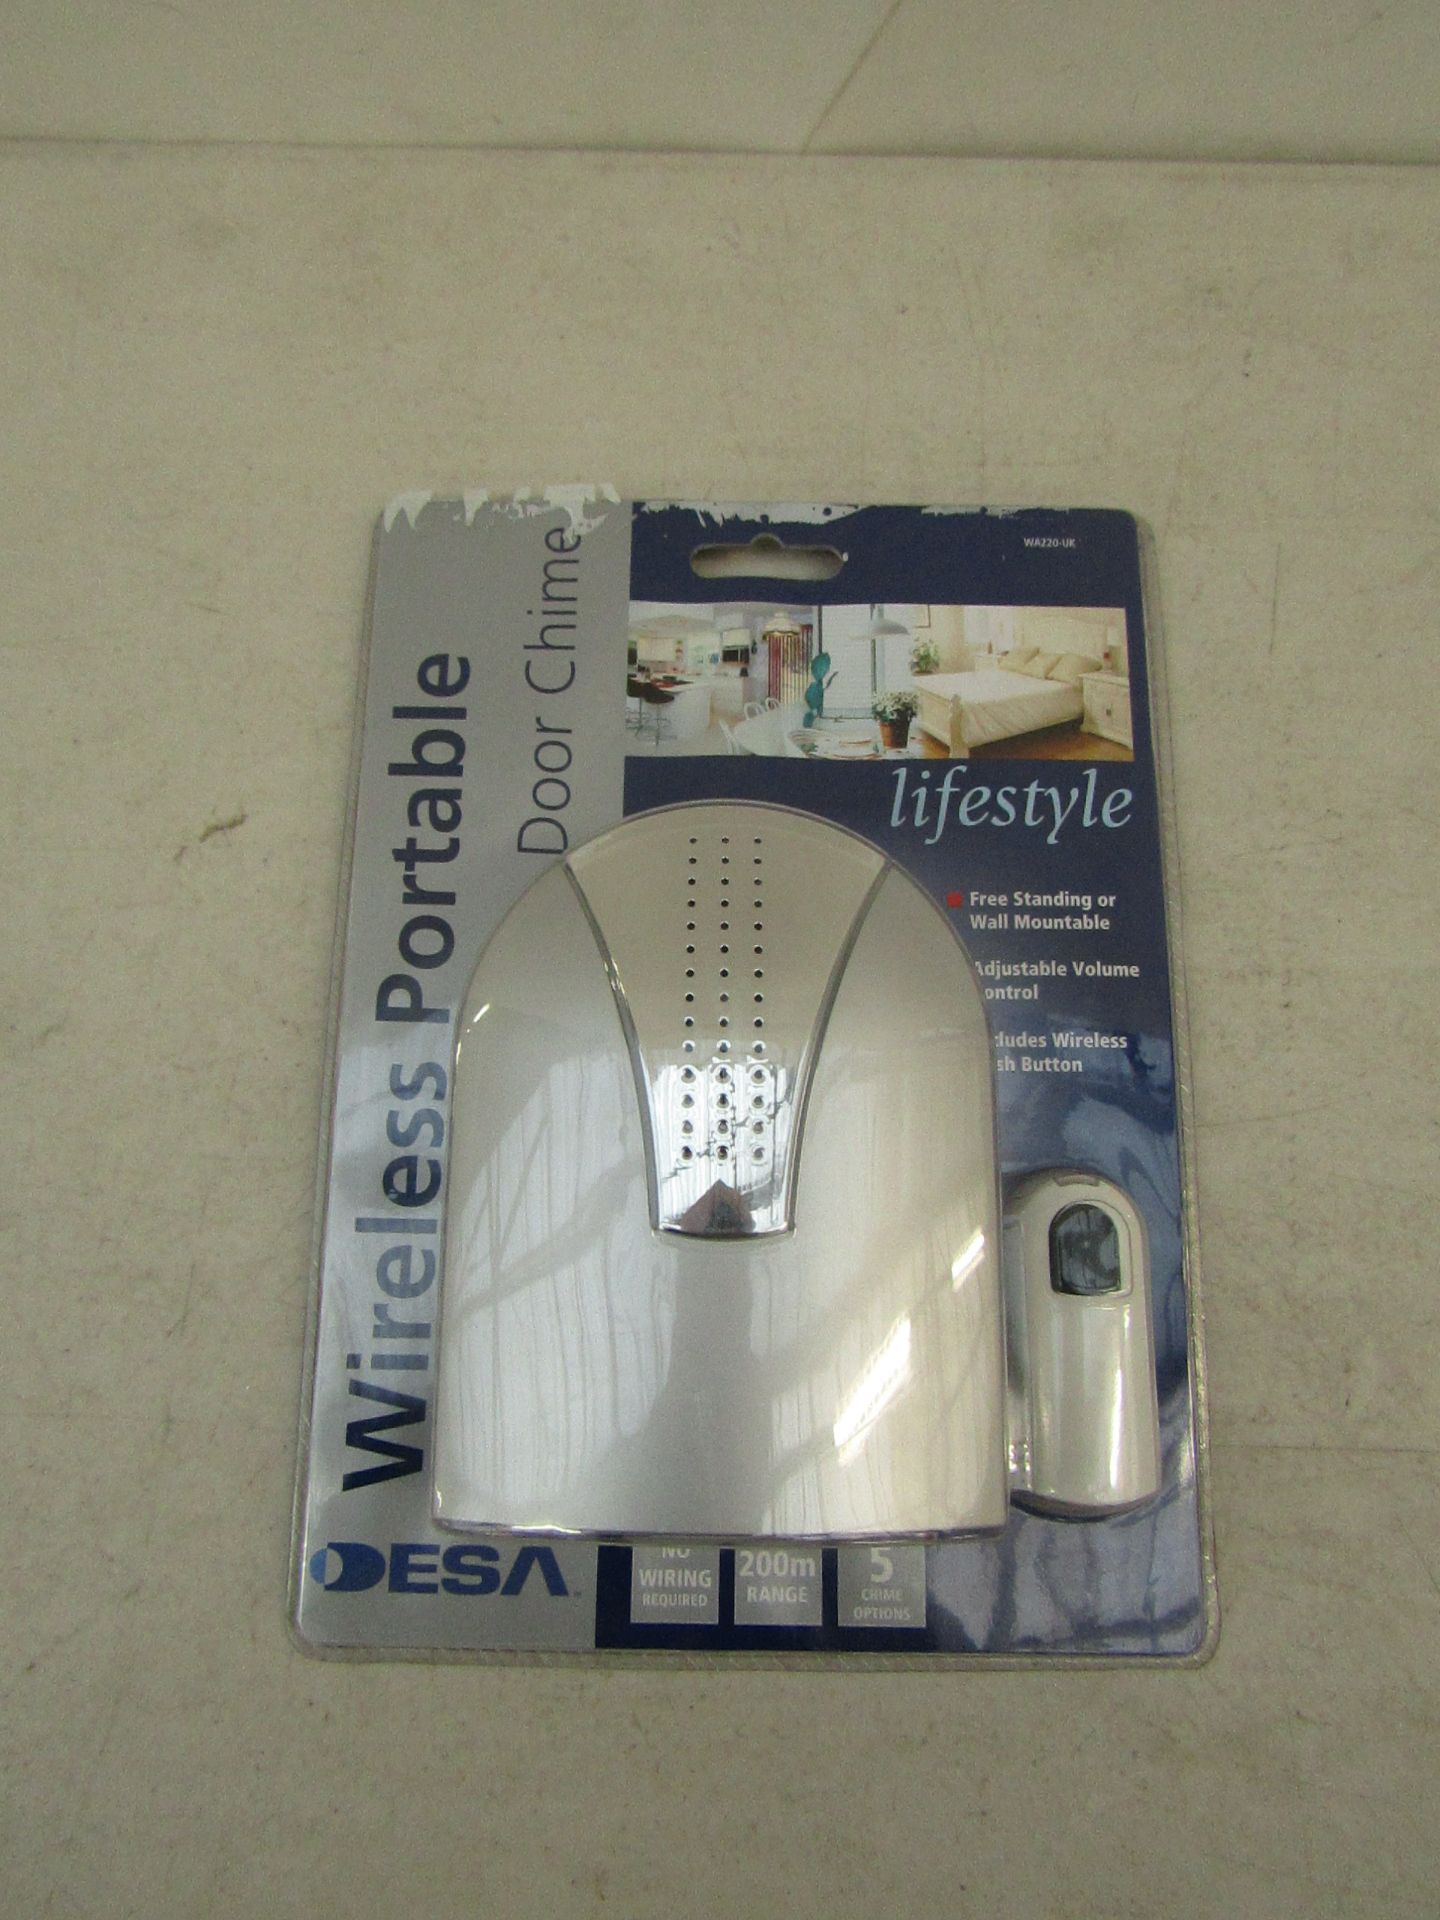 Desa wireless portable door chime, new and packaged.